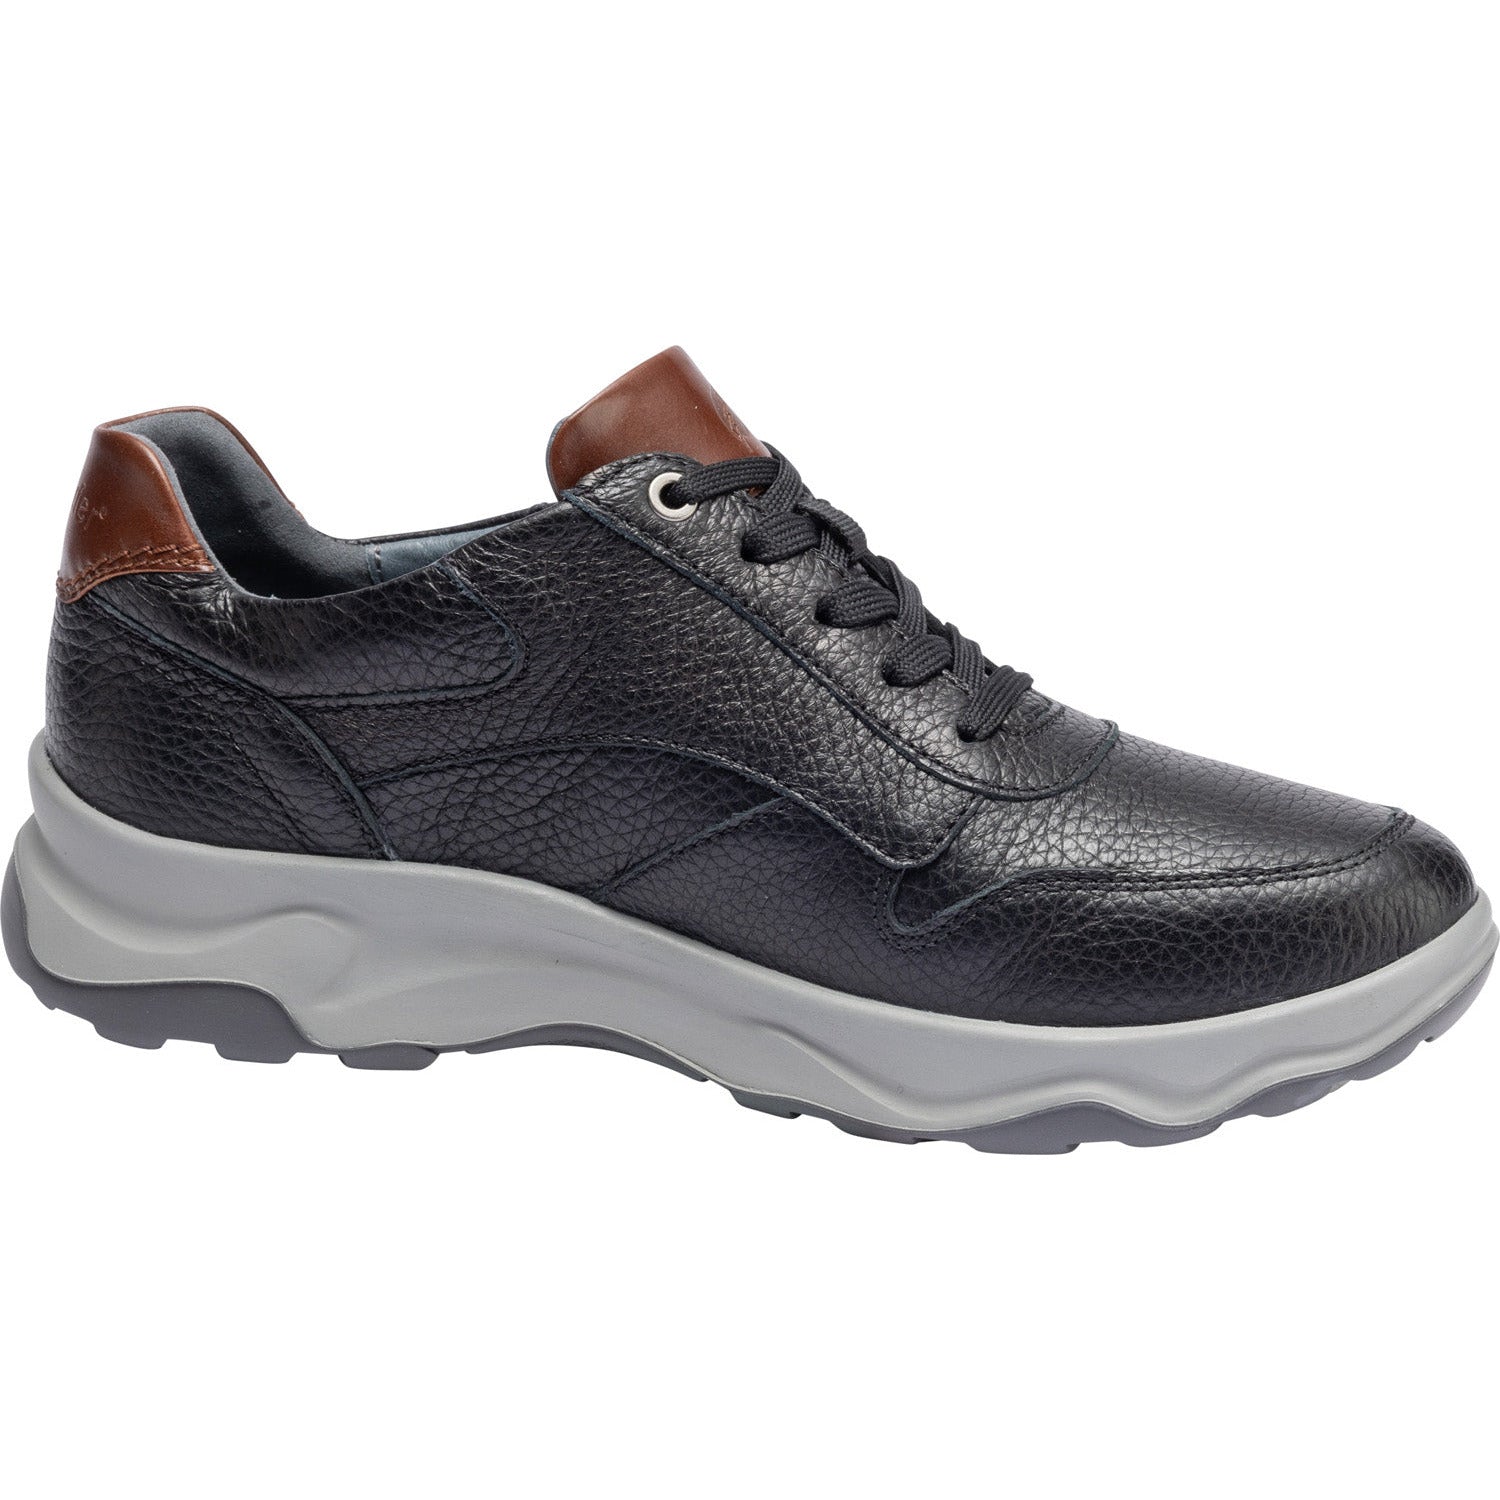 Waldlaufer H-Max (718007) - Mens Lace up with Zip Shoe -Wide Fit .Waldlaufer  | Wide Fit Shoes | Wisemans | Bantry | West Cork | Ireland